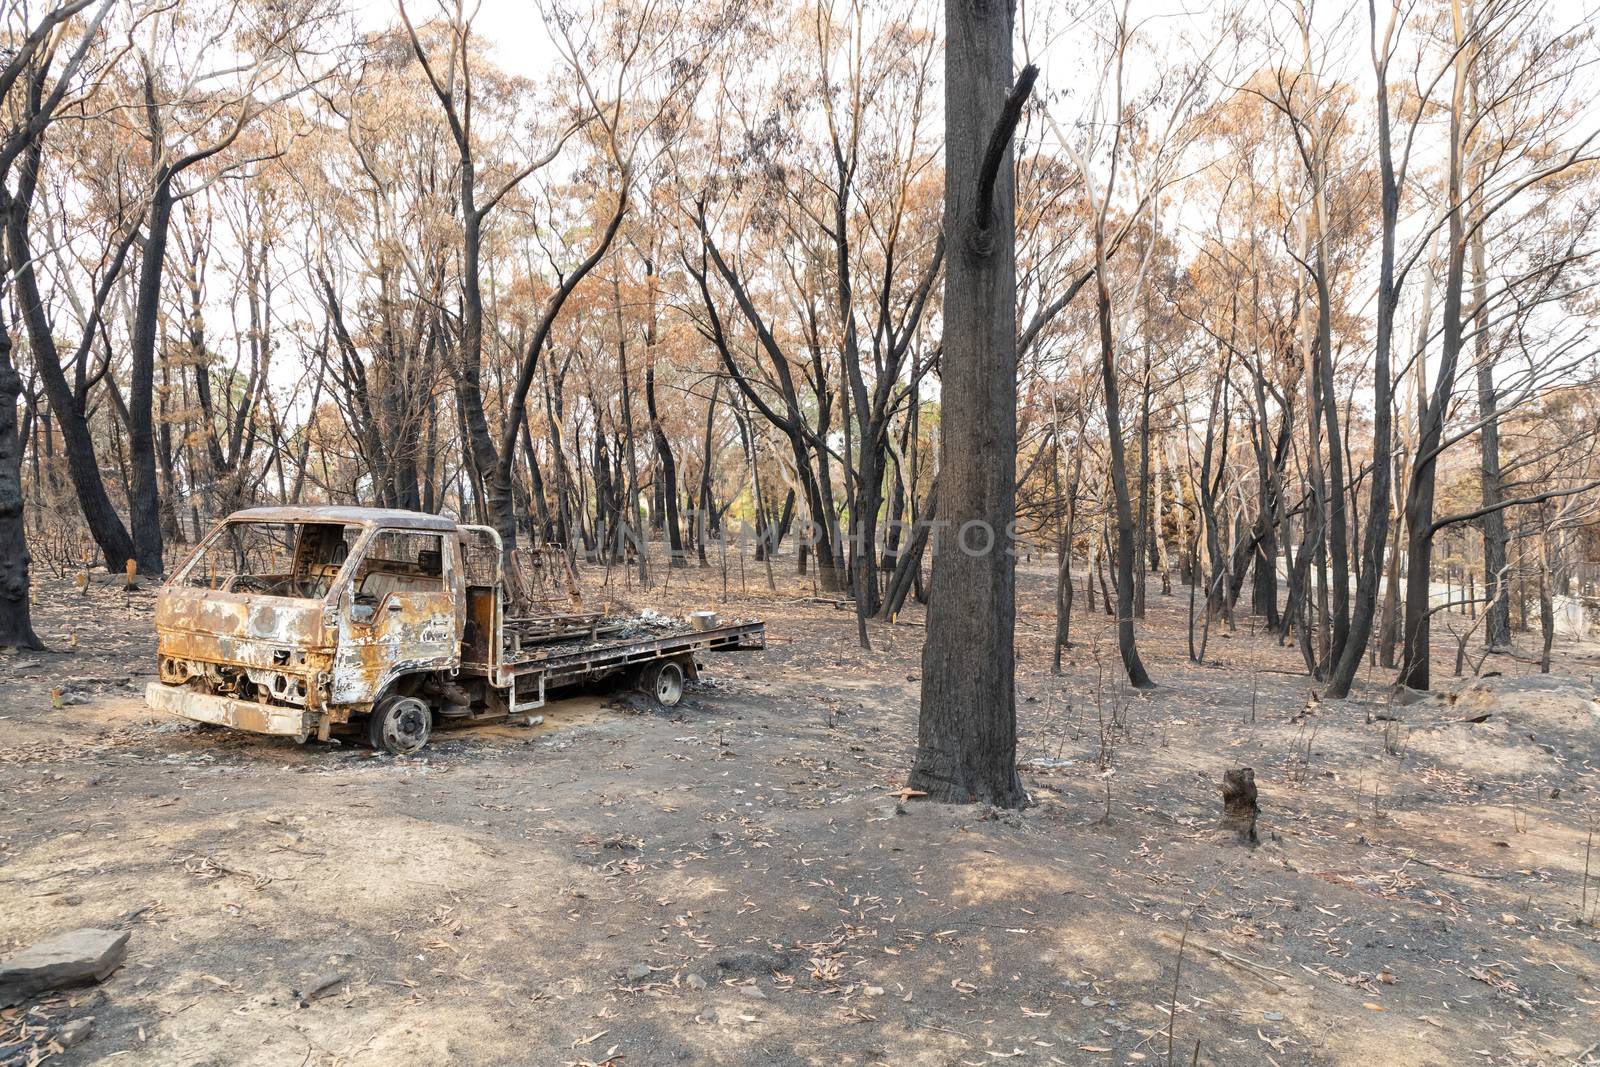 A burnt truck amongst severely burnt gum trees after a bushfire in The Blue Mountains in Australia